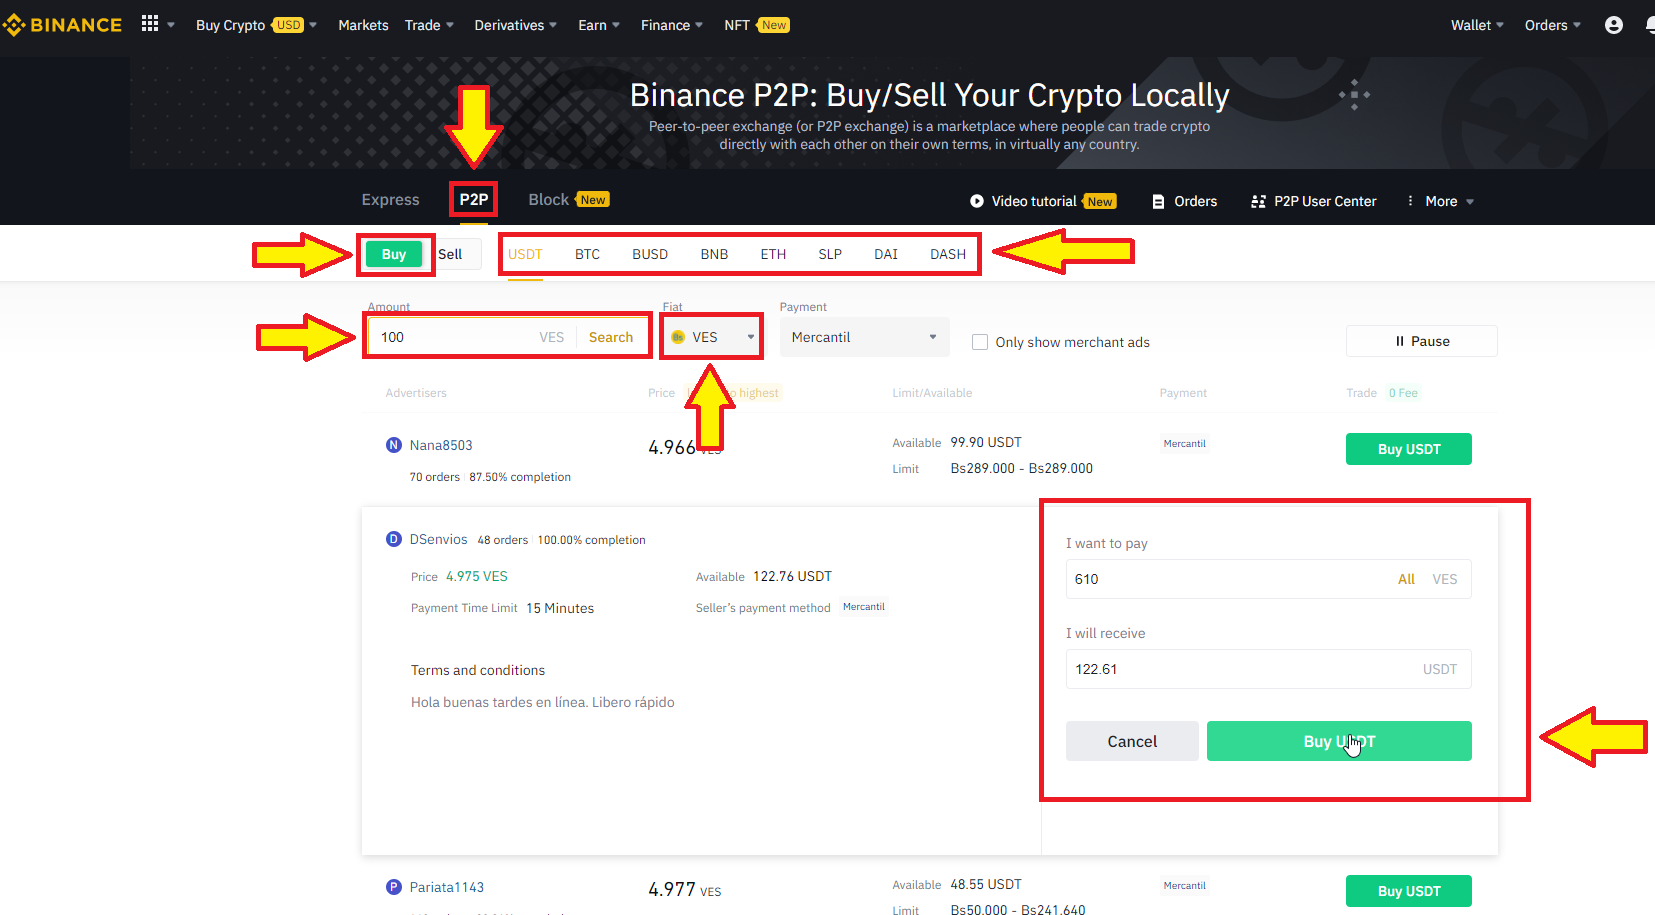 Buy ClearPoll crypto in P2P with a verified account on Binance